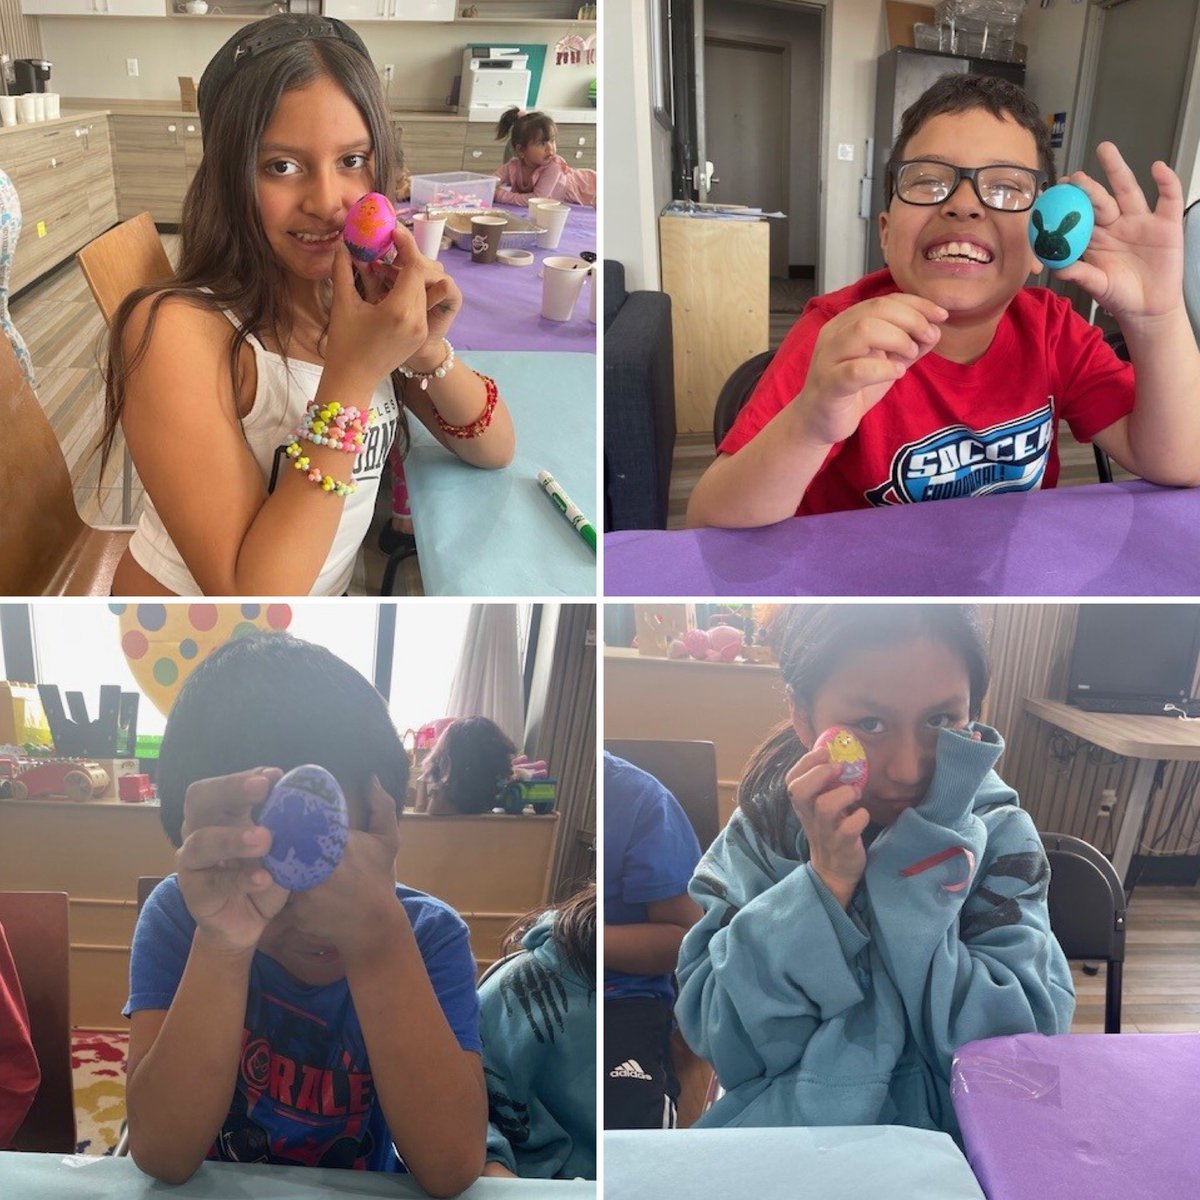 We’re still basking in the fun of our Easter egg decorating activity at Fortitude House, our Brooklyn sanctuary that houses 84 families. #HappyEaster